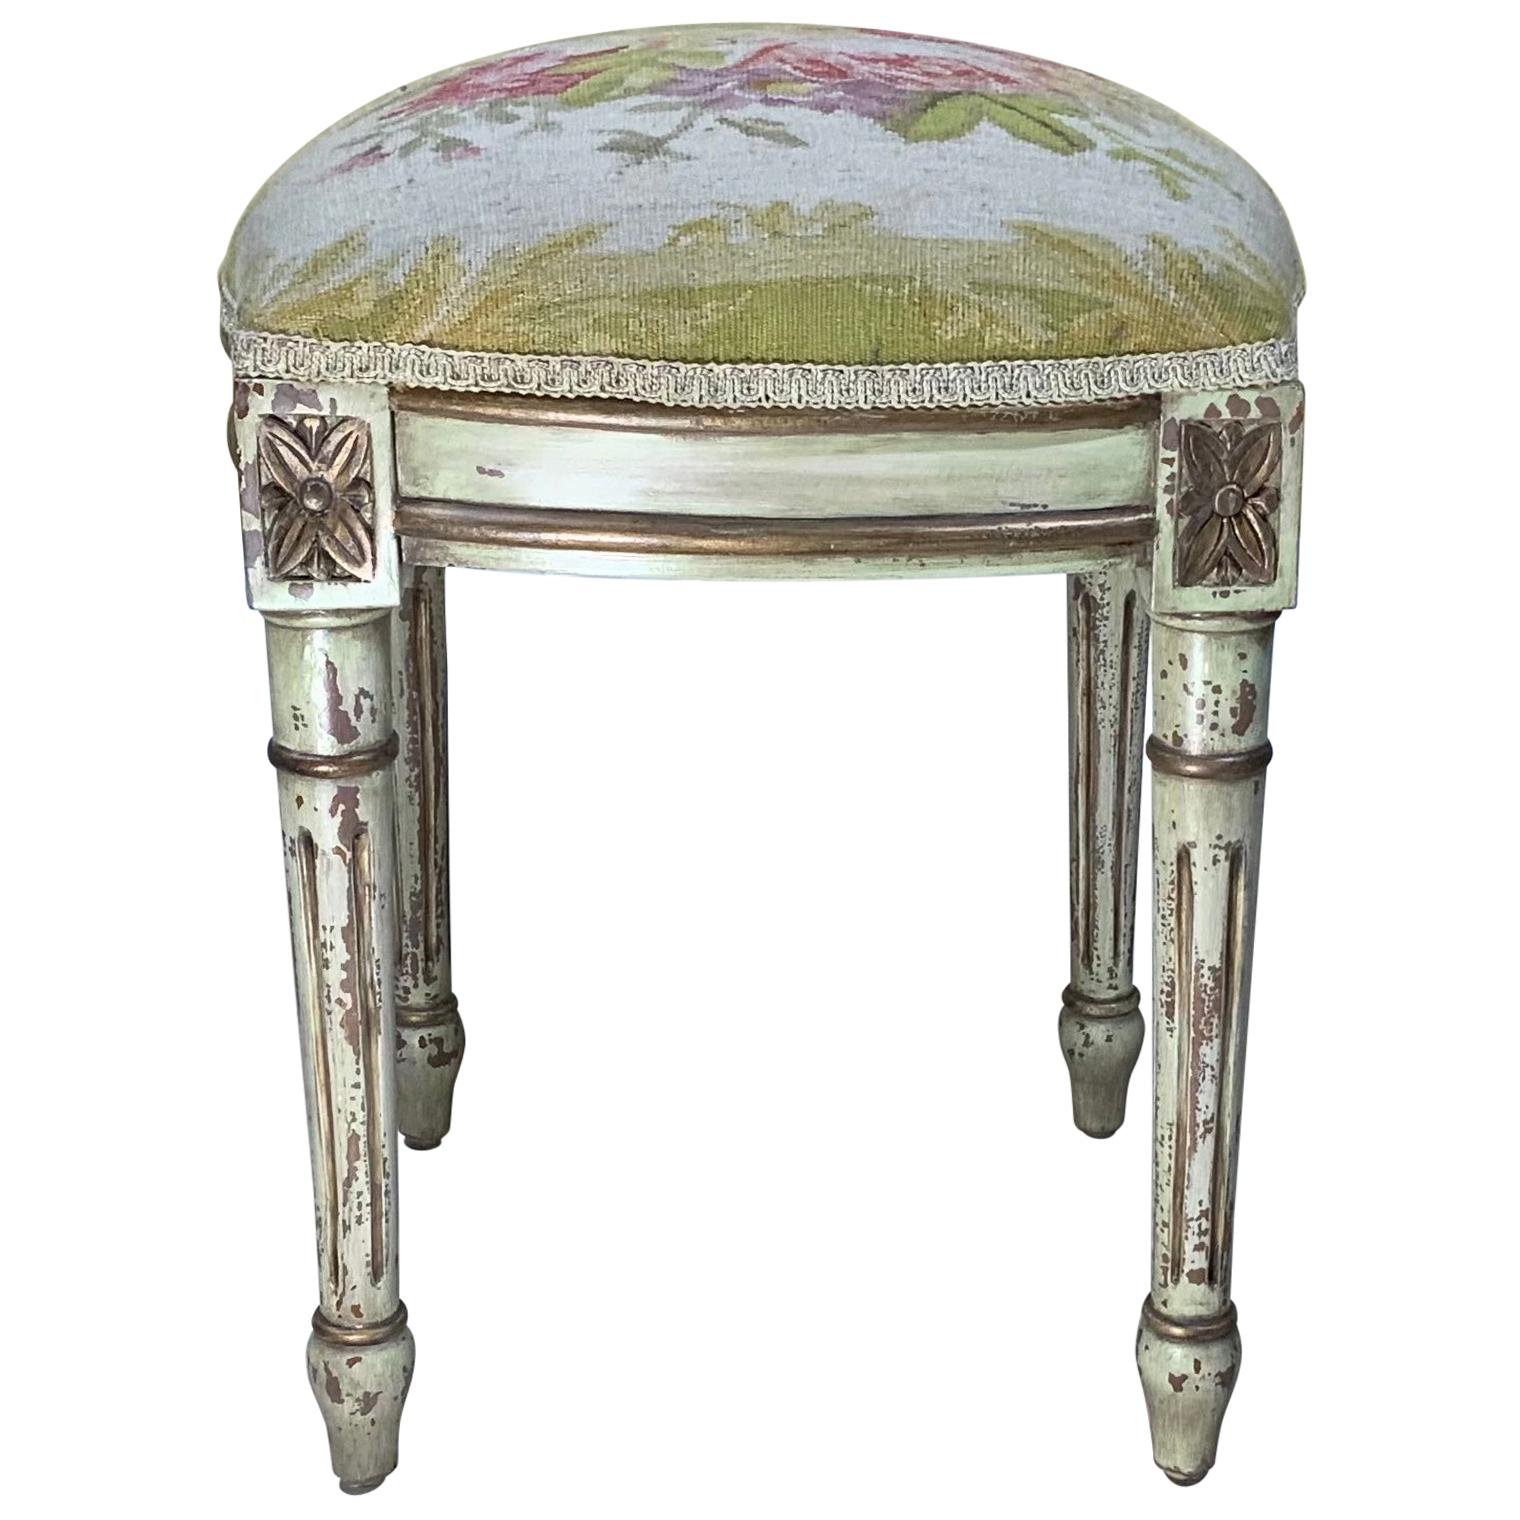 Vintage Square Aubusson Tapestry Stool